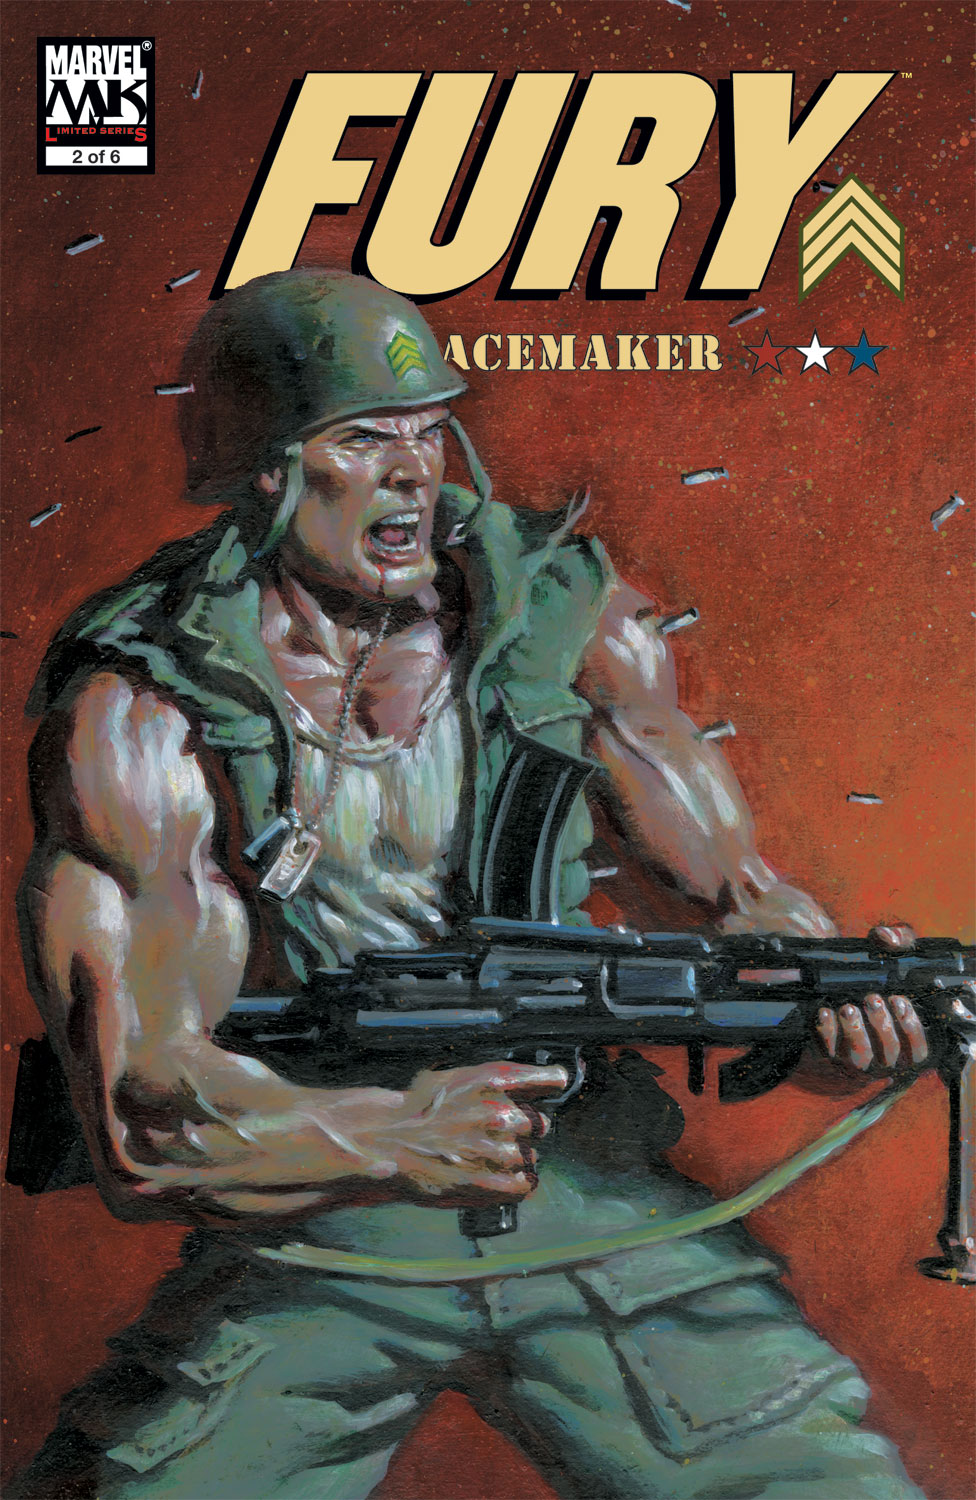 Fury: Peacemaker (2006) #2